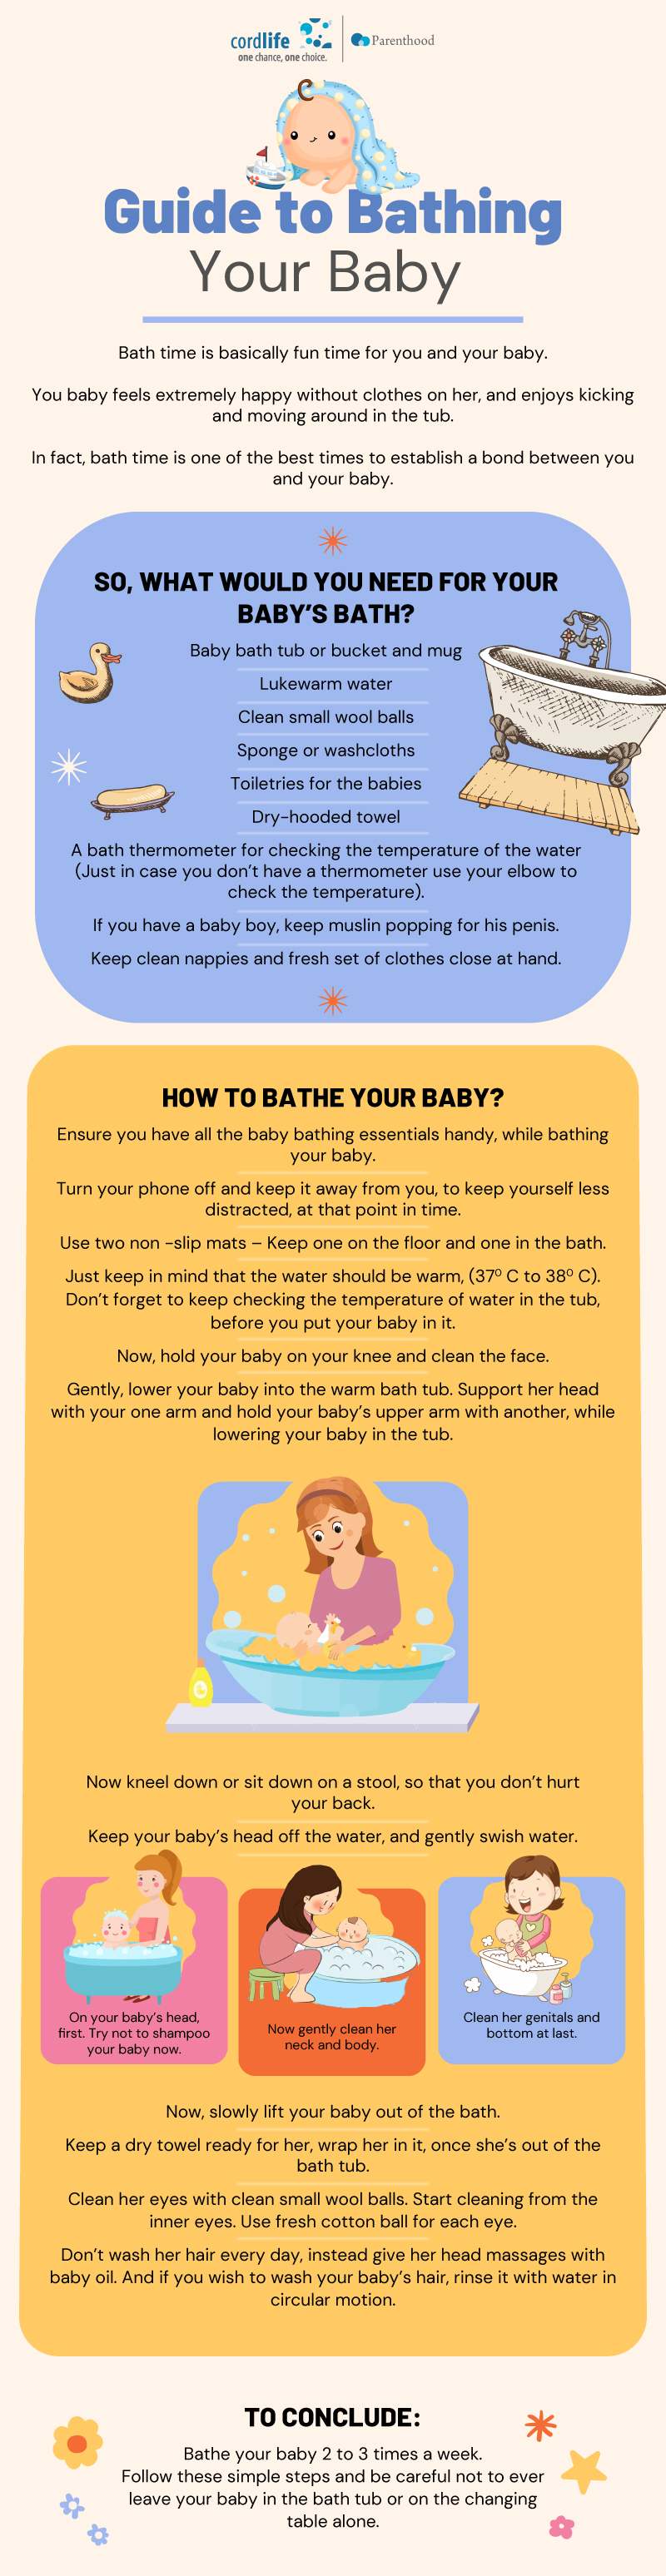 Guide To Bathing Your Baby